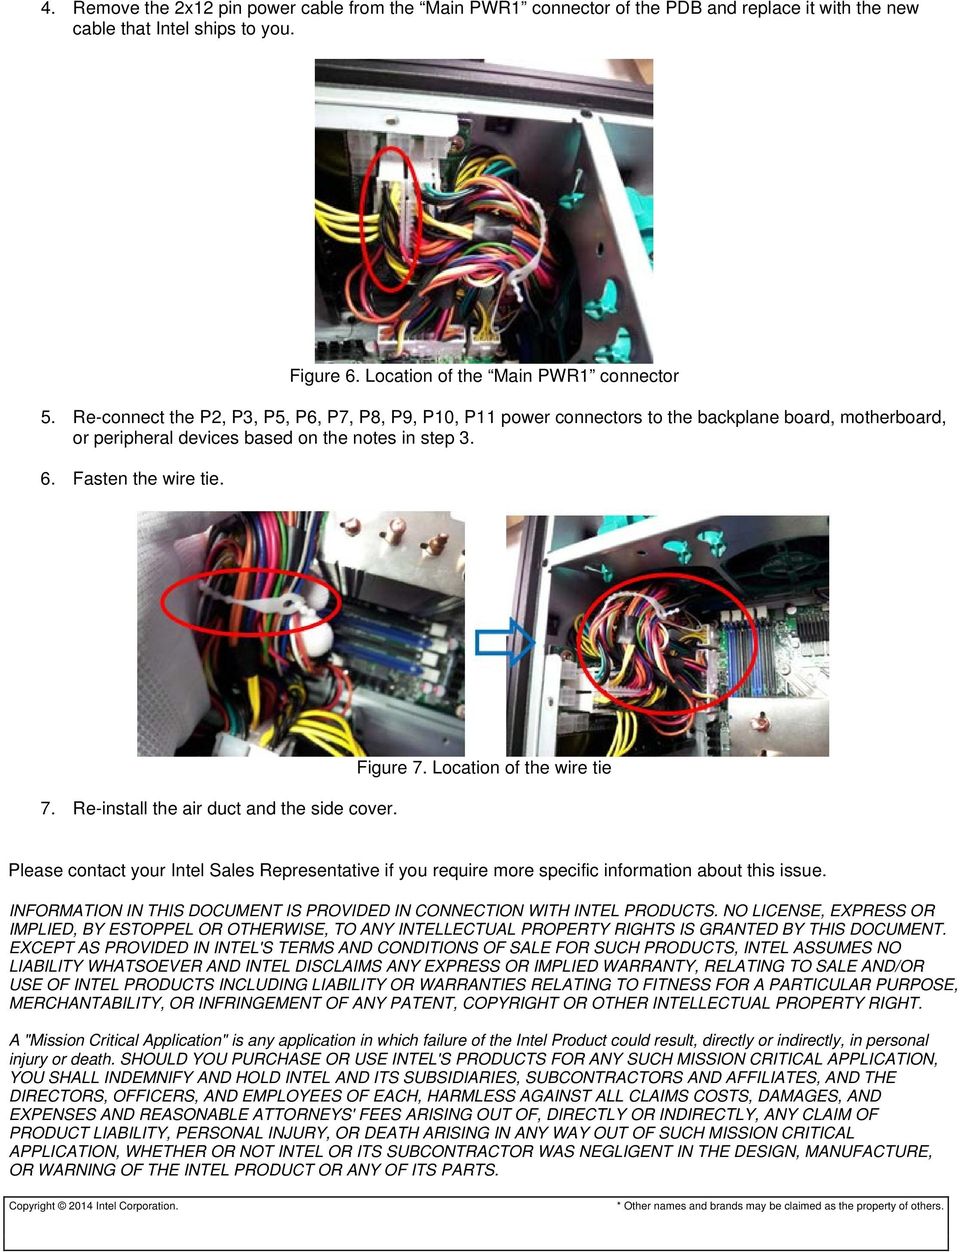 Re-install the air duct and the side cover. Figure 7. Location of the wire tie Please contact your Intel Sales Representative if you require more specific information about this issue.